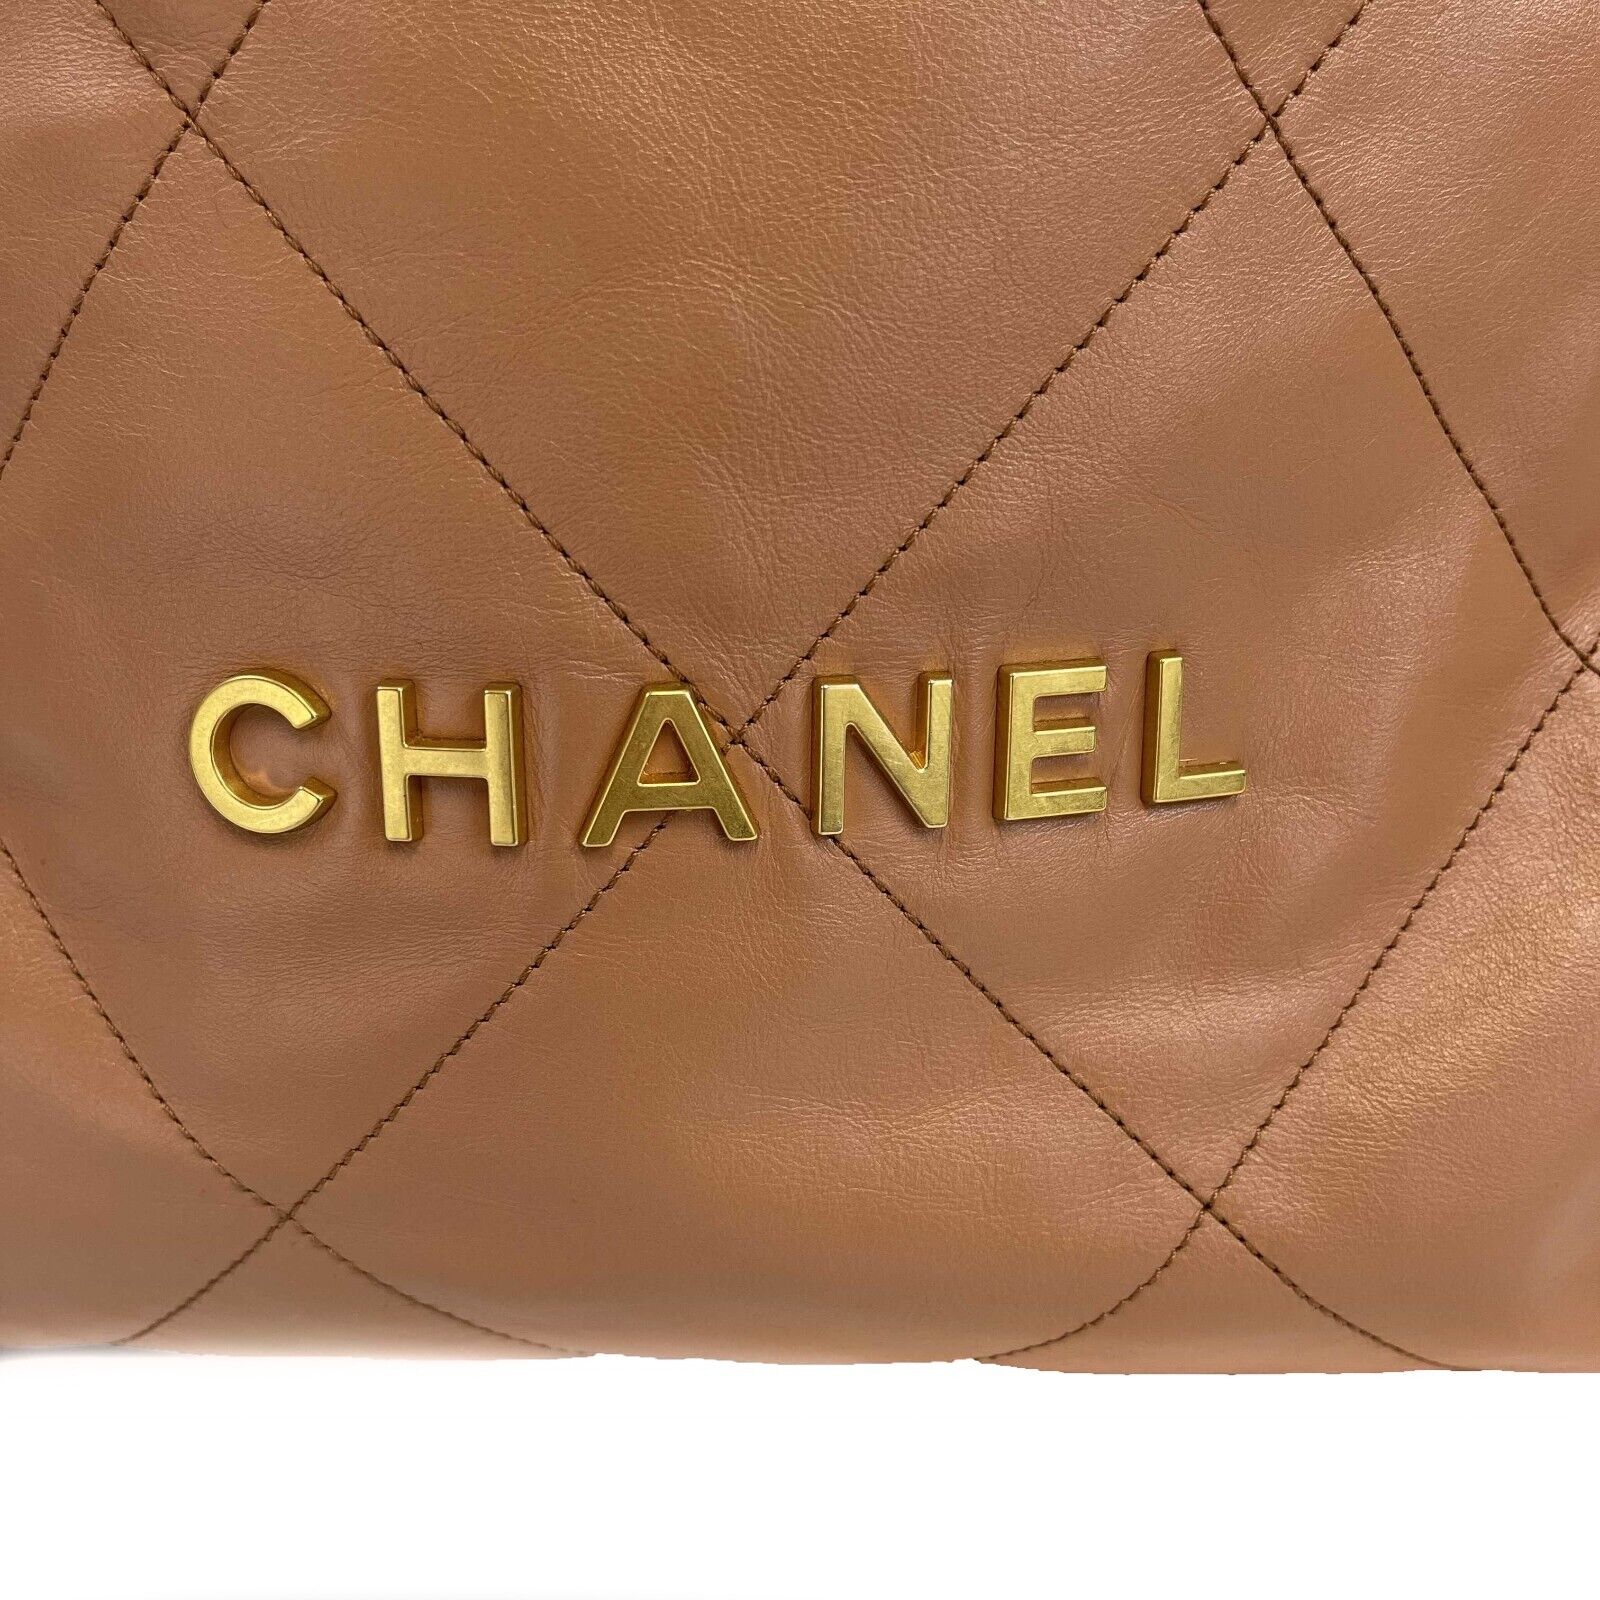 CHANEL 22 bag in caramel ⭕️Small / medium available now⭕️ 焦糖色22包現貨